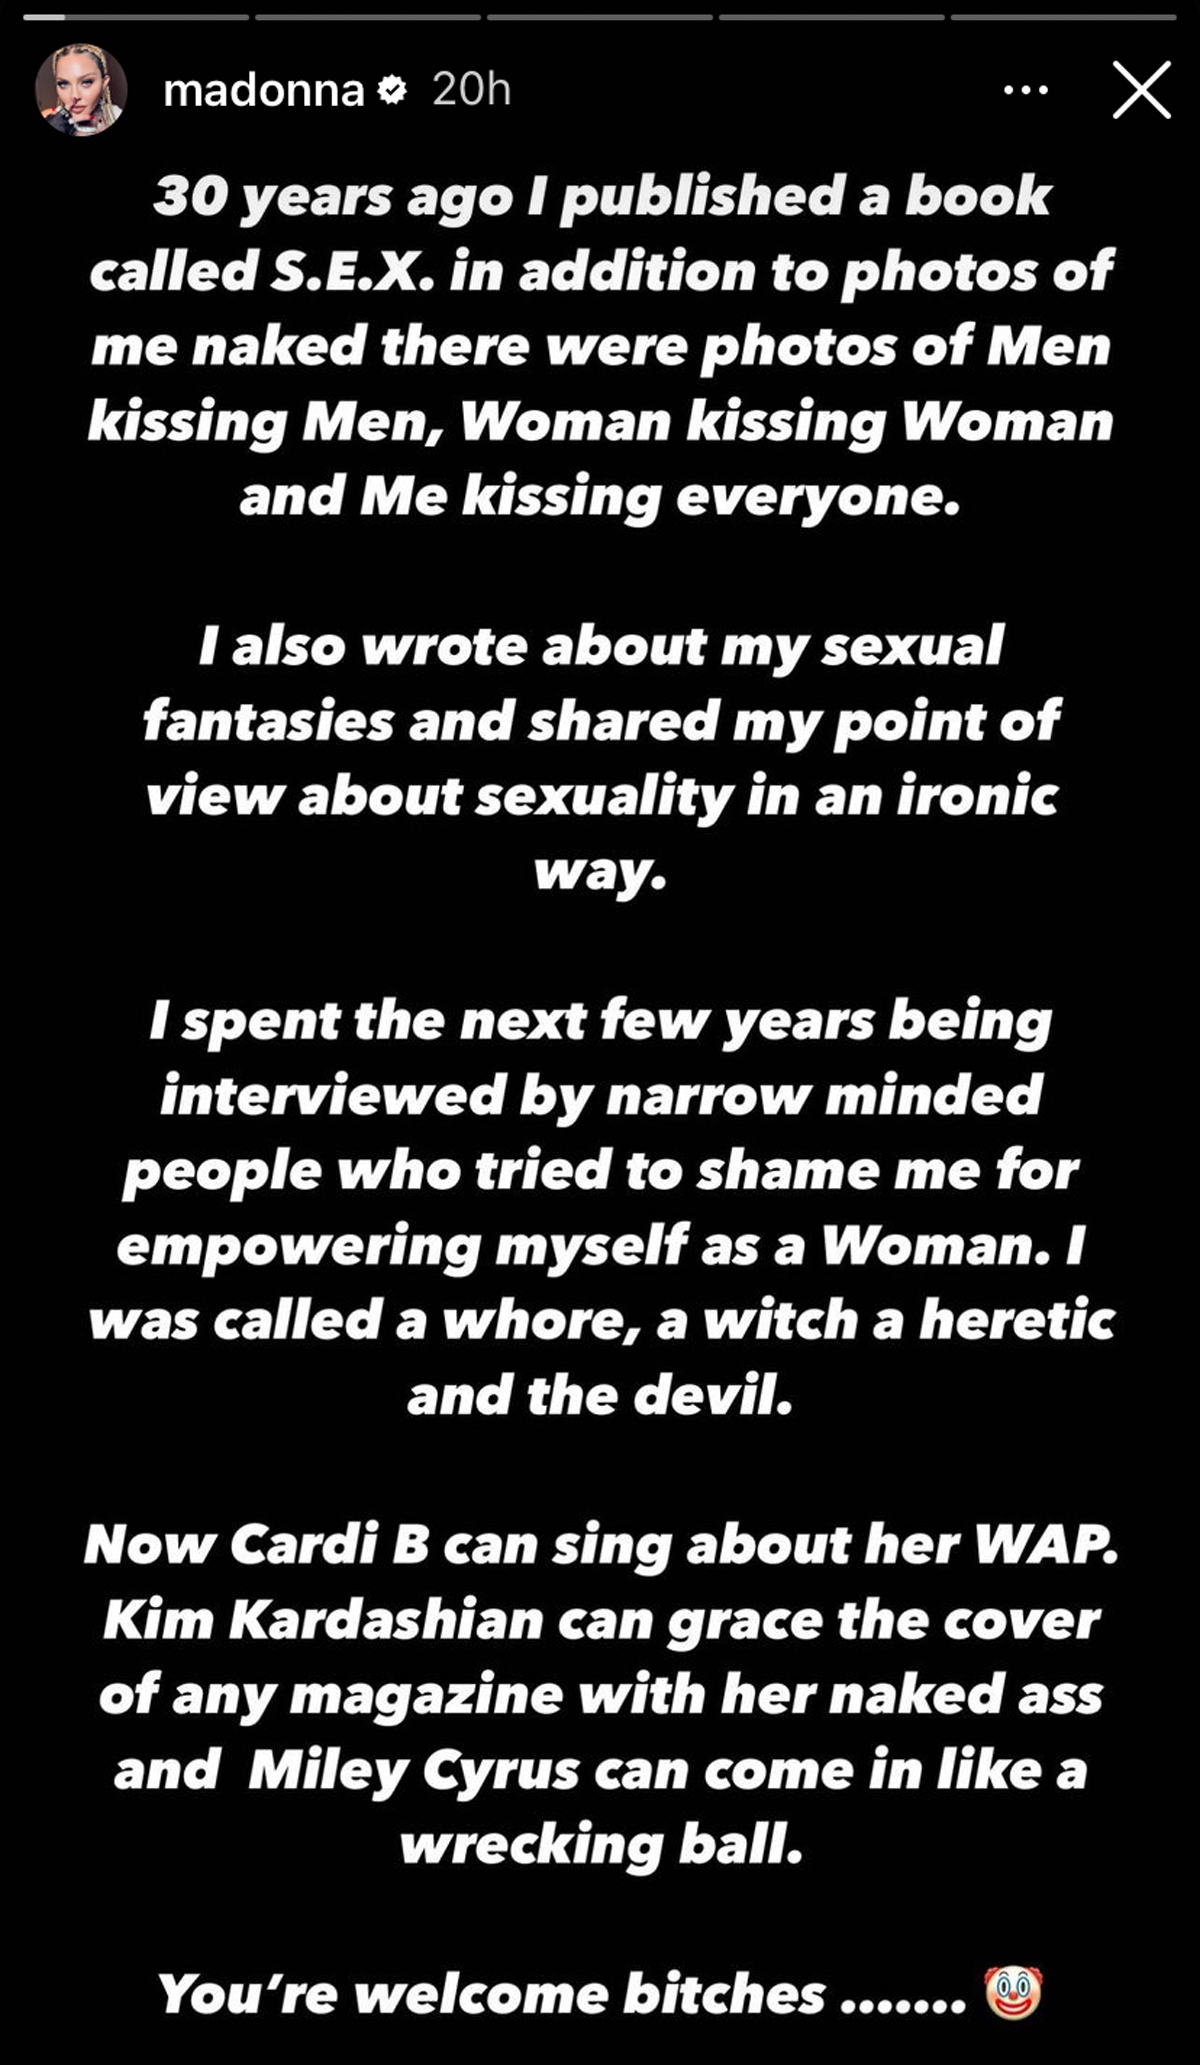 Cardi B Goes Off On Madonna For Calling Her A Bitch And Using Clown Emoji In Sex Book Anniversary